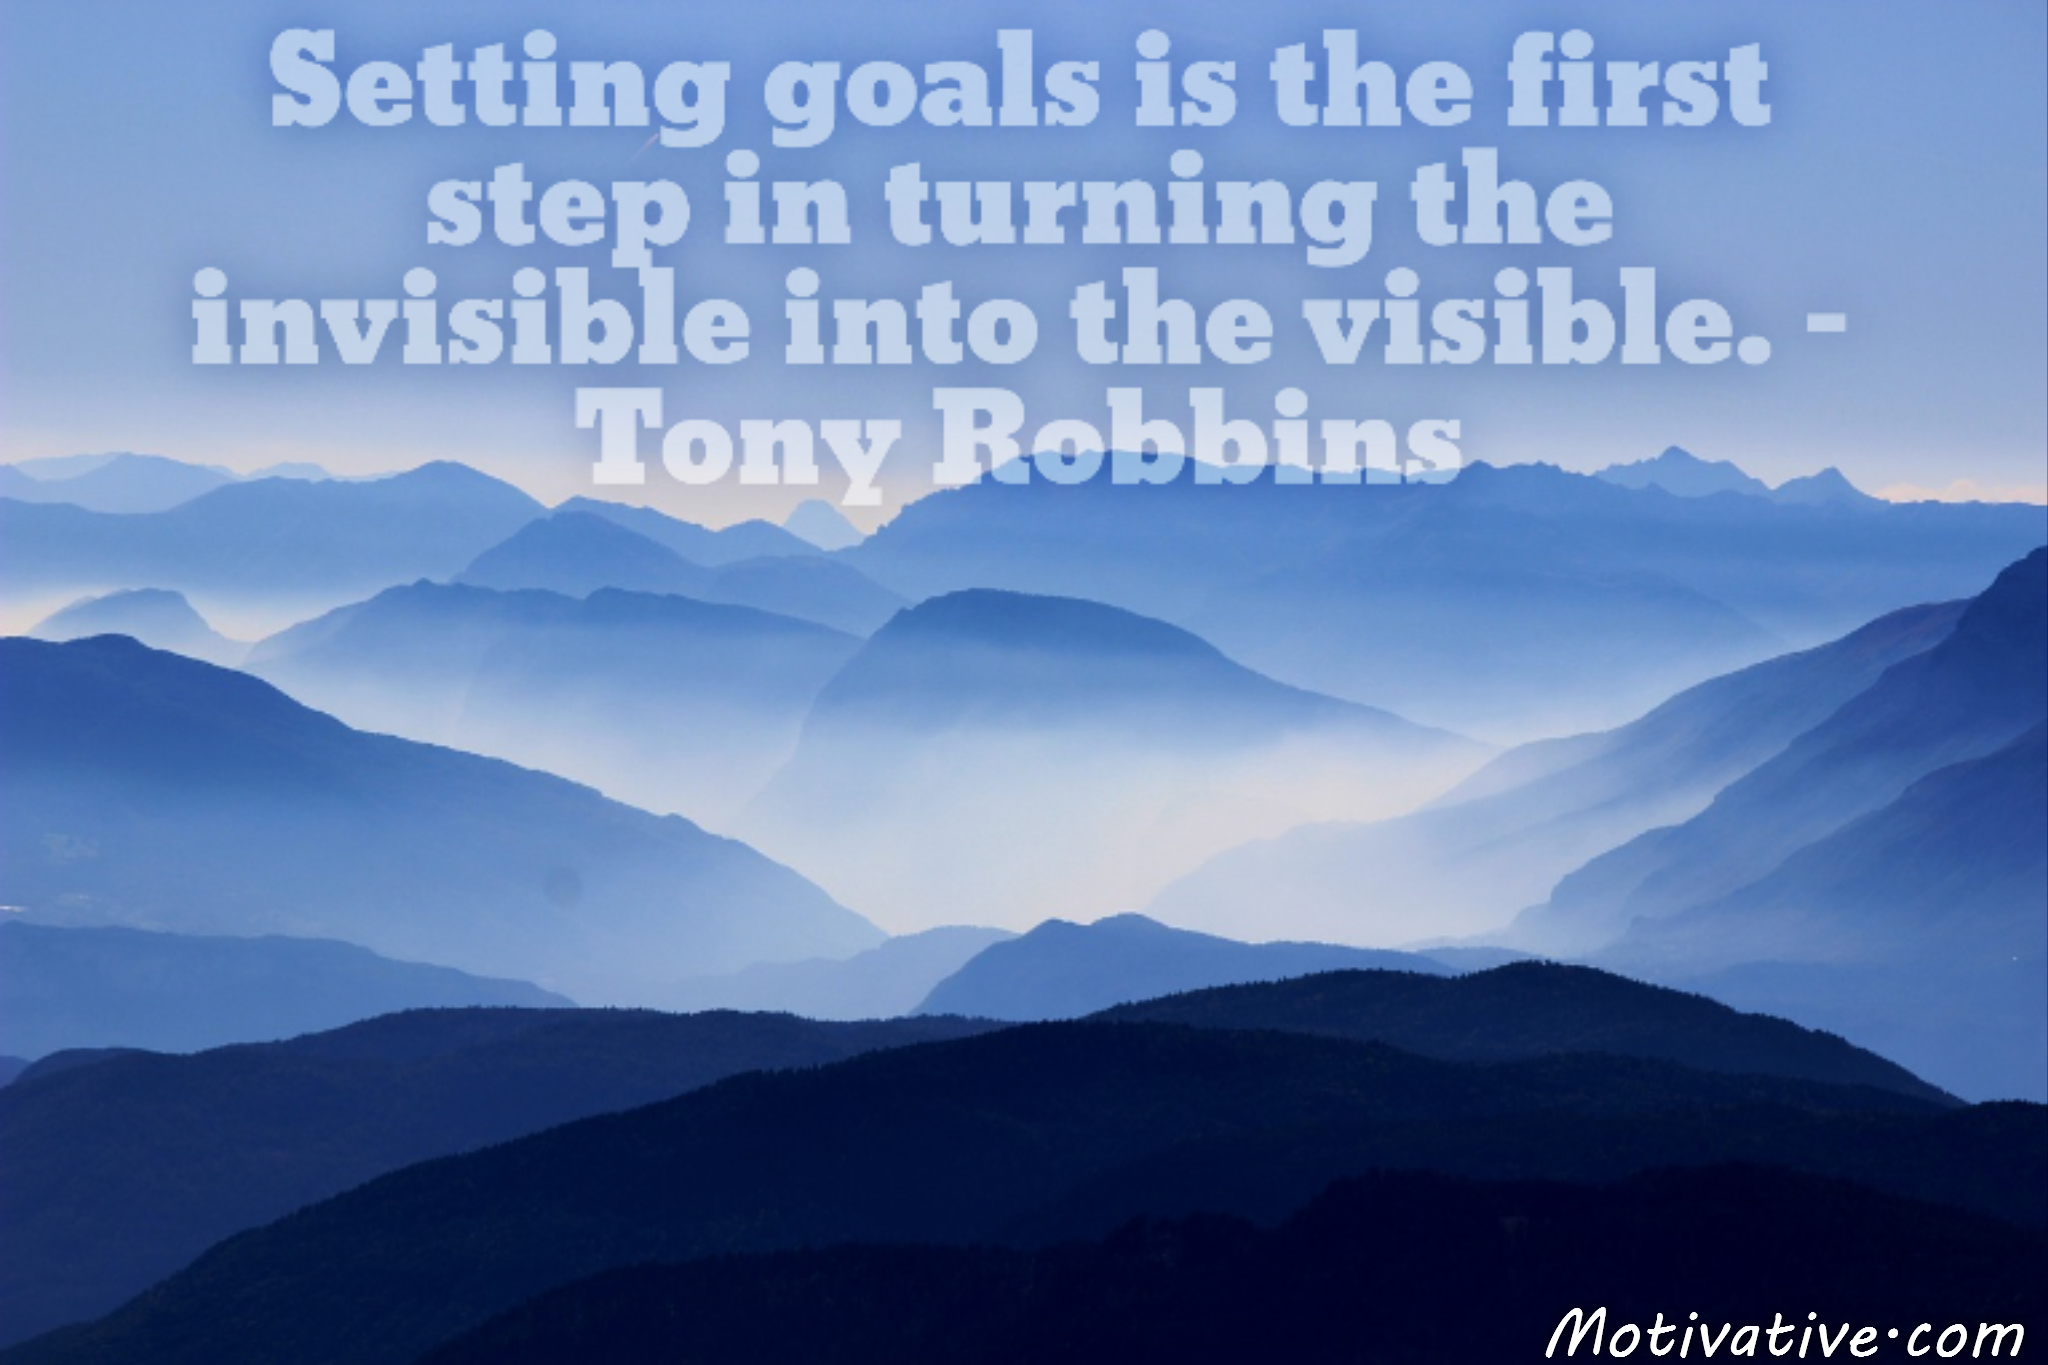 Setting goals is the first step in turning the invisible into the visible. – Tony Robbins